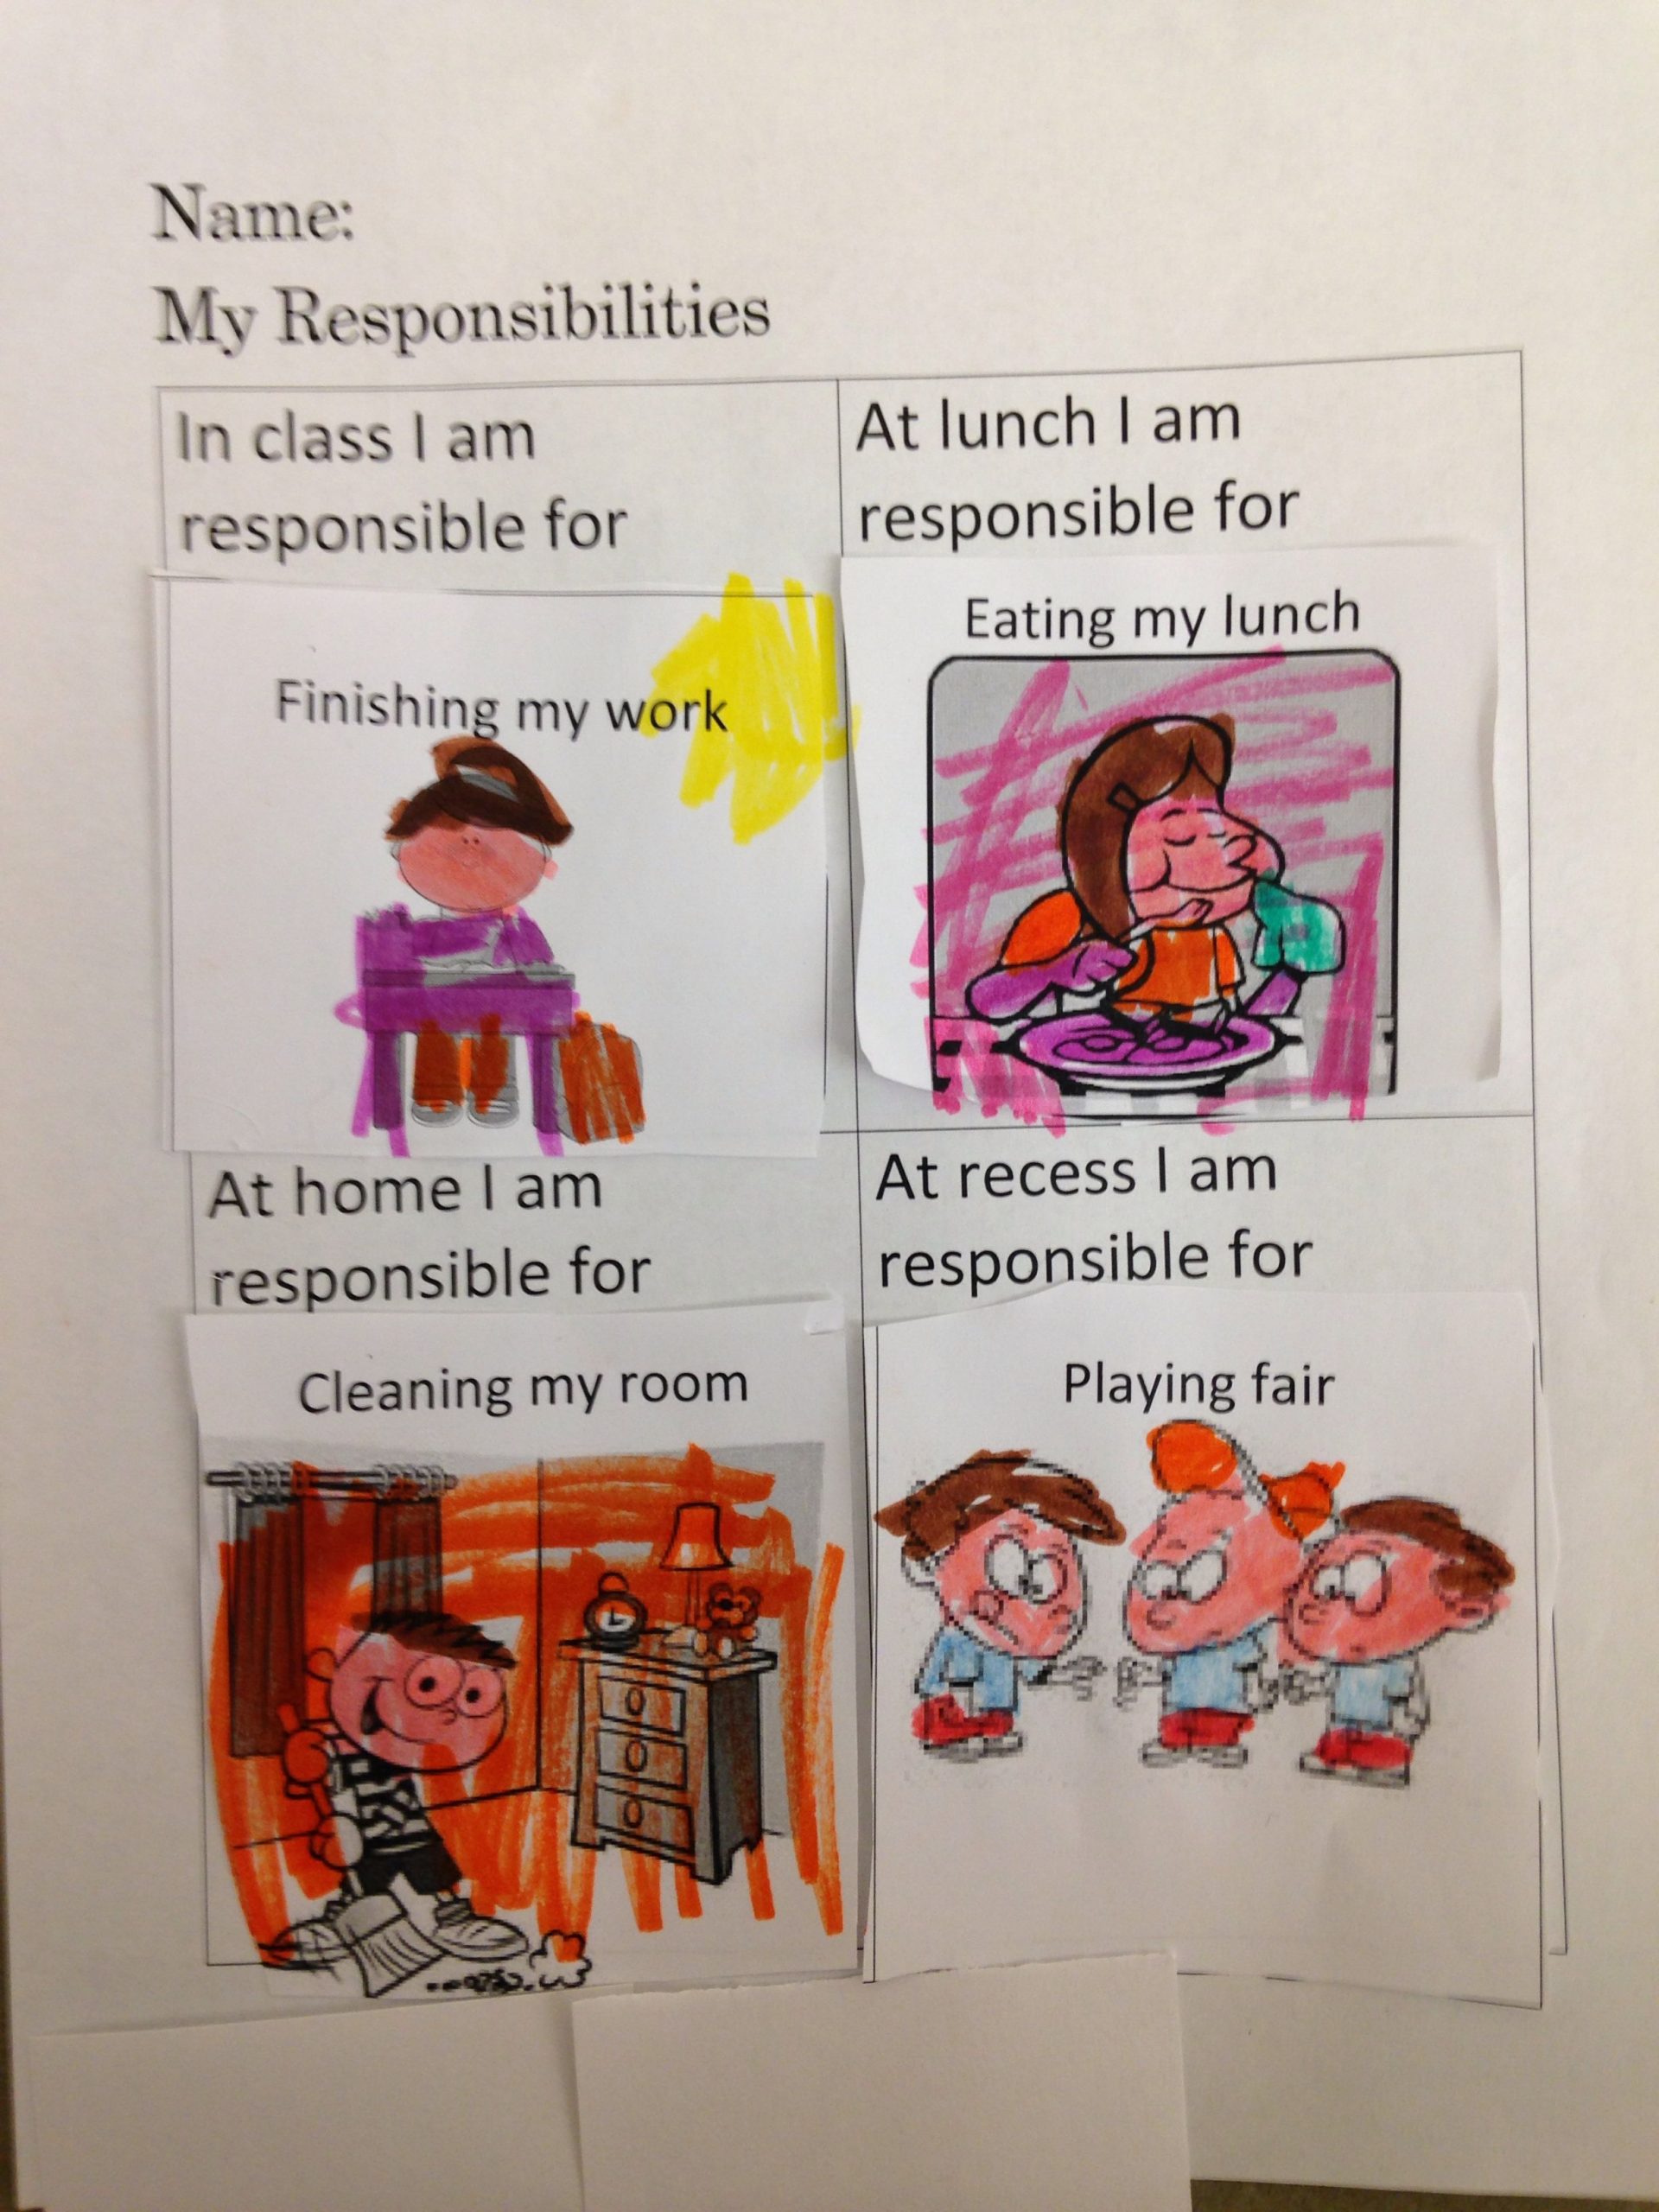 Lesson 1 In Responsibility Unit- Match The Responsibility